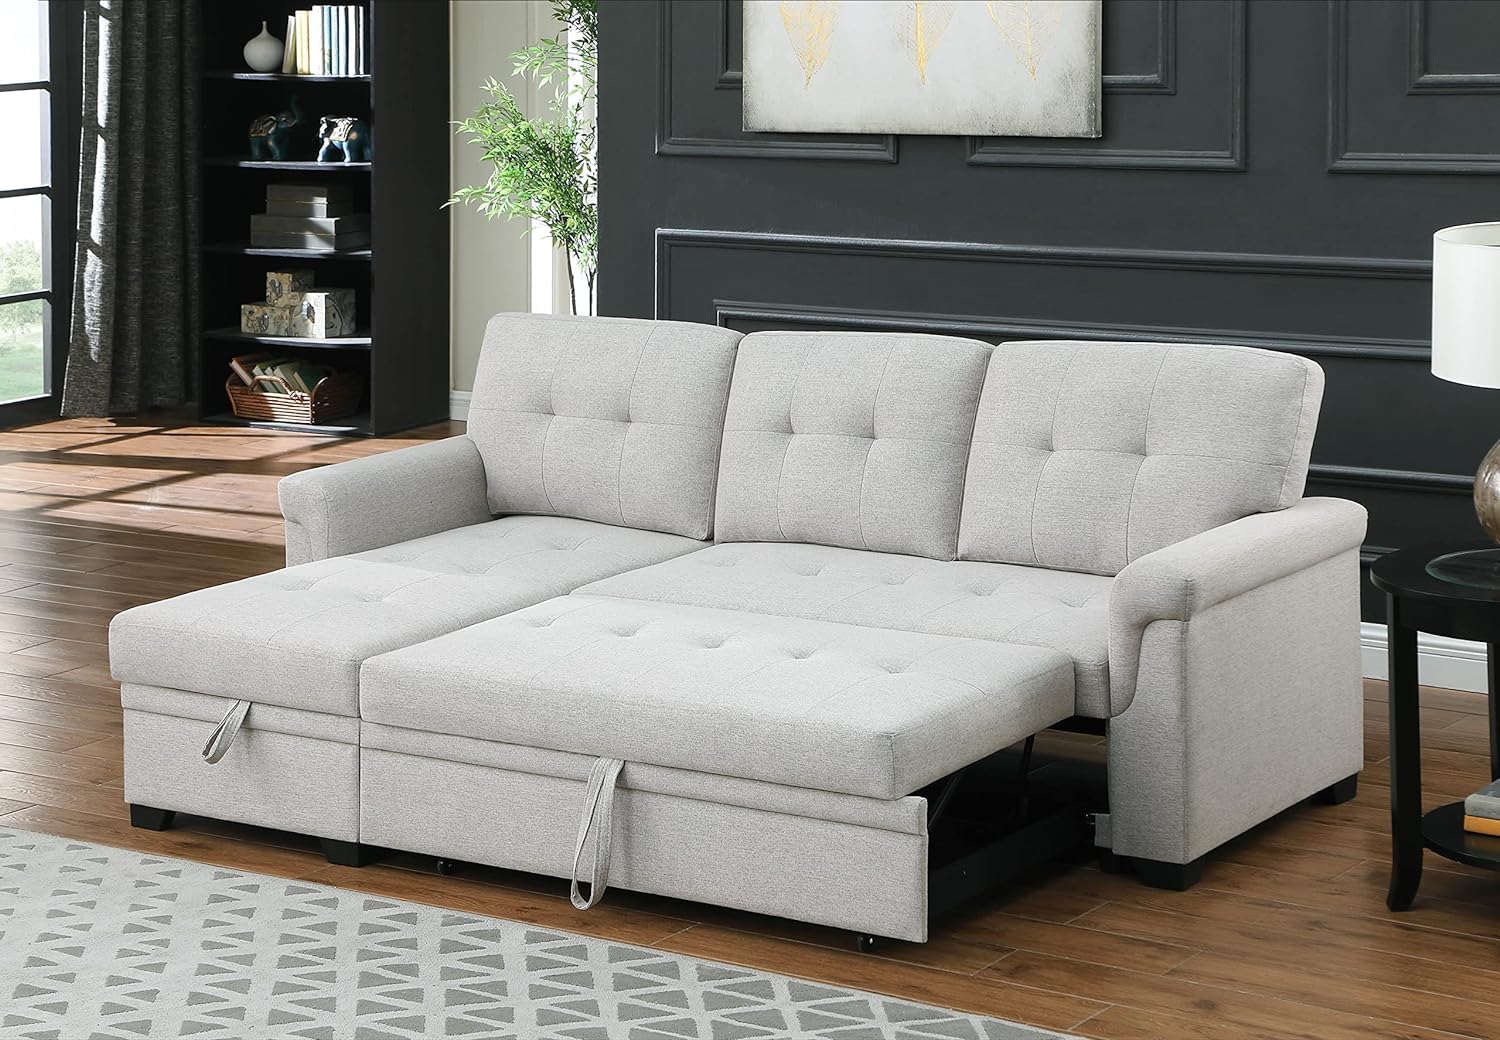 PONNYC Contemporary Reversible Sectional Sleeper Sectional Sofa 0